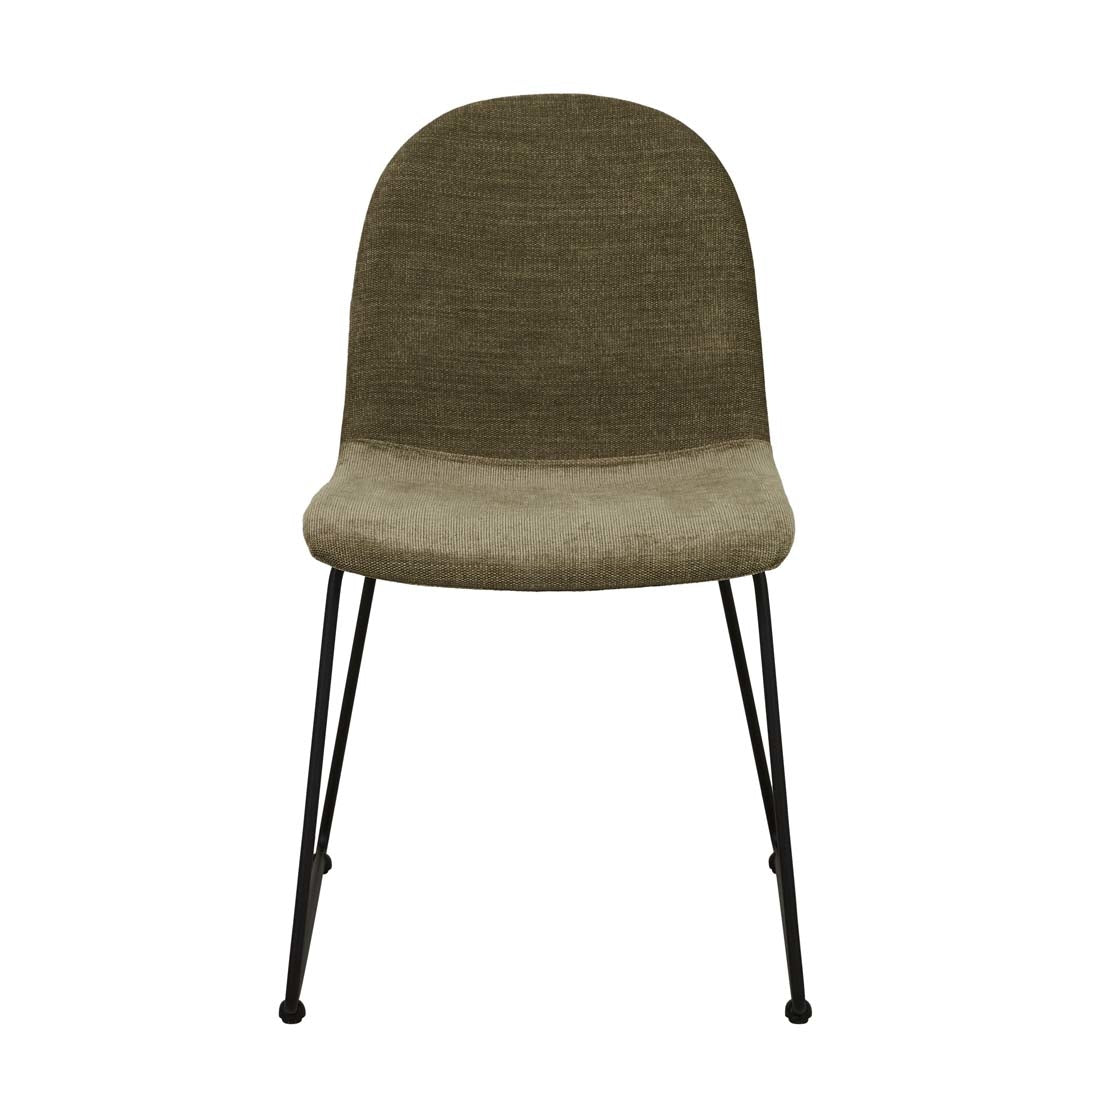 Smith Sleigh Dining Chair - Copeland Olive